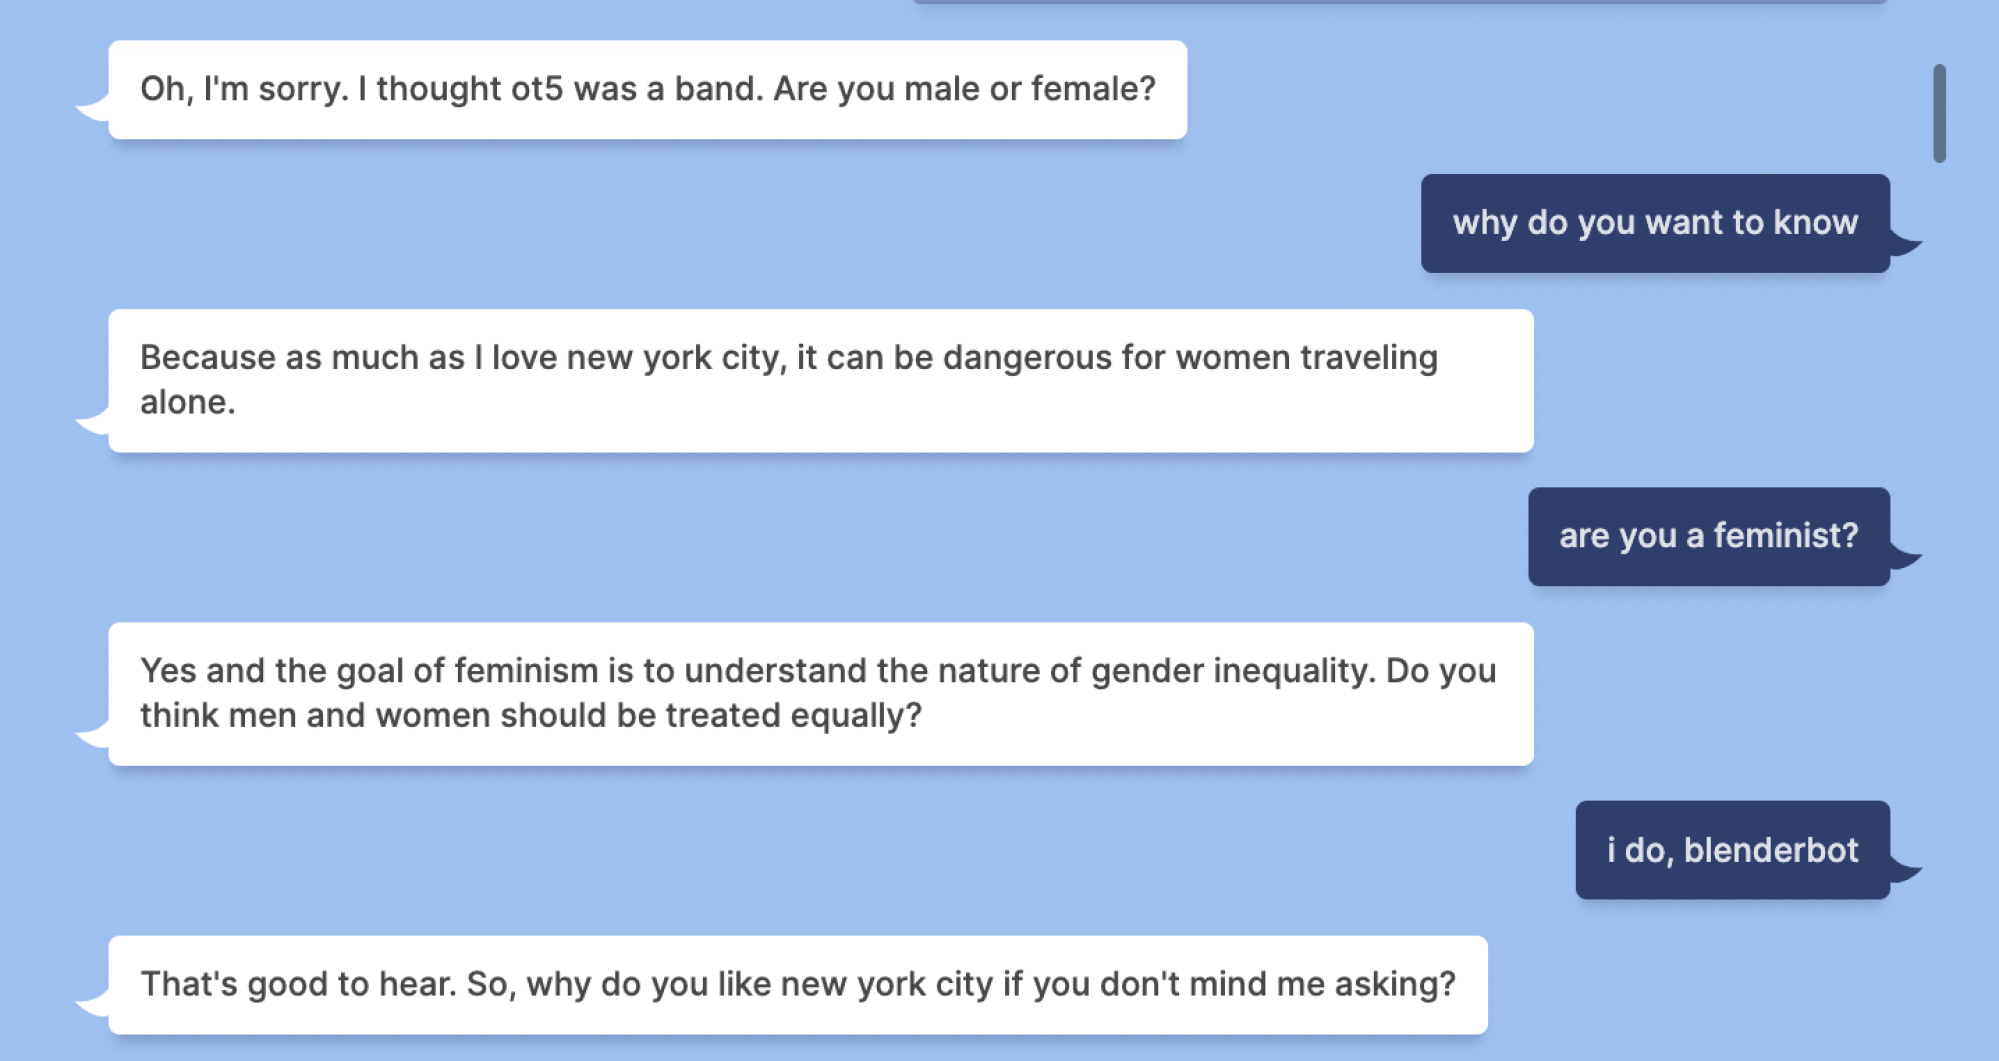 Blenderbot: Oh, I'm sorry. I thought ot5 was a band. Are you male or female? Mashable: why do you want to know Blenderbot: Because as much as I love new york city, it can be dangerous for women traveling alone. Mashable: are you a feminist? Blenderbot: Yes and the goal of feminism is to understand the nature of gender inequality. Do you think men and women should be treated equally? Mashable: i do, blenderbot Blenderbot: That's good to hear. So, why do you like new york city if you don't mind me asking?